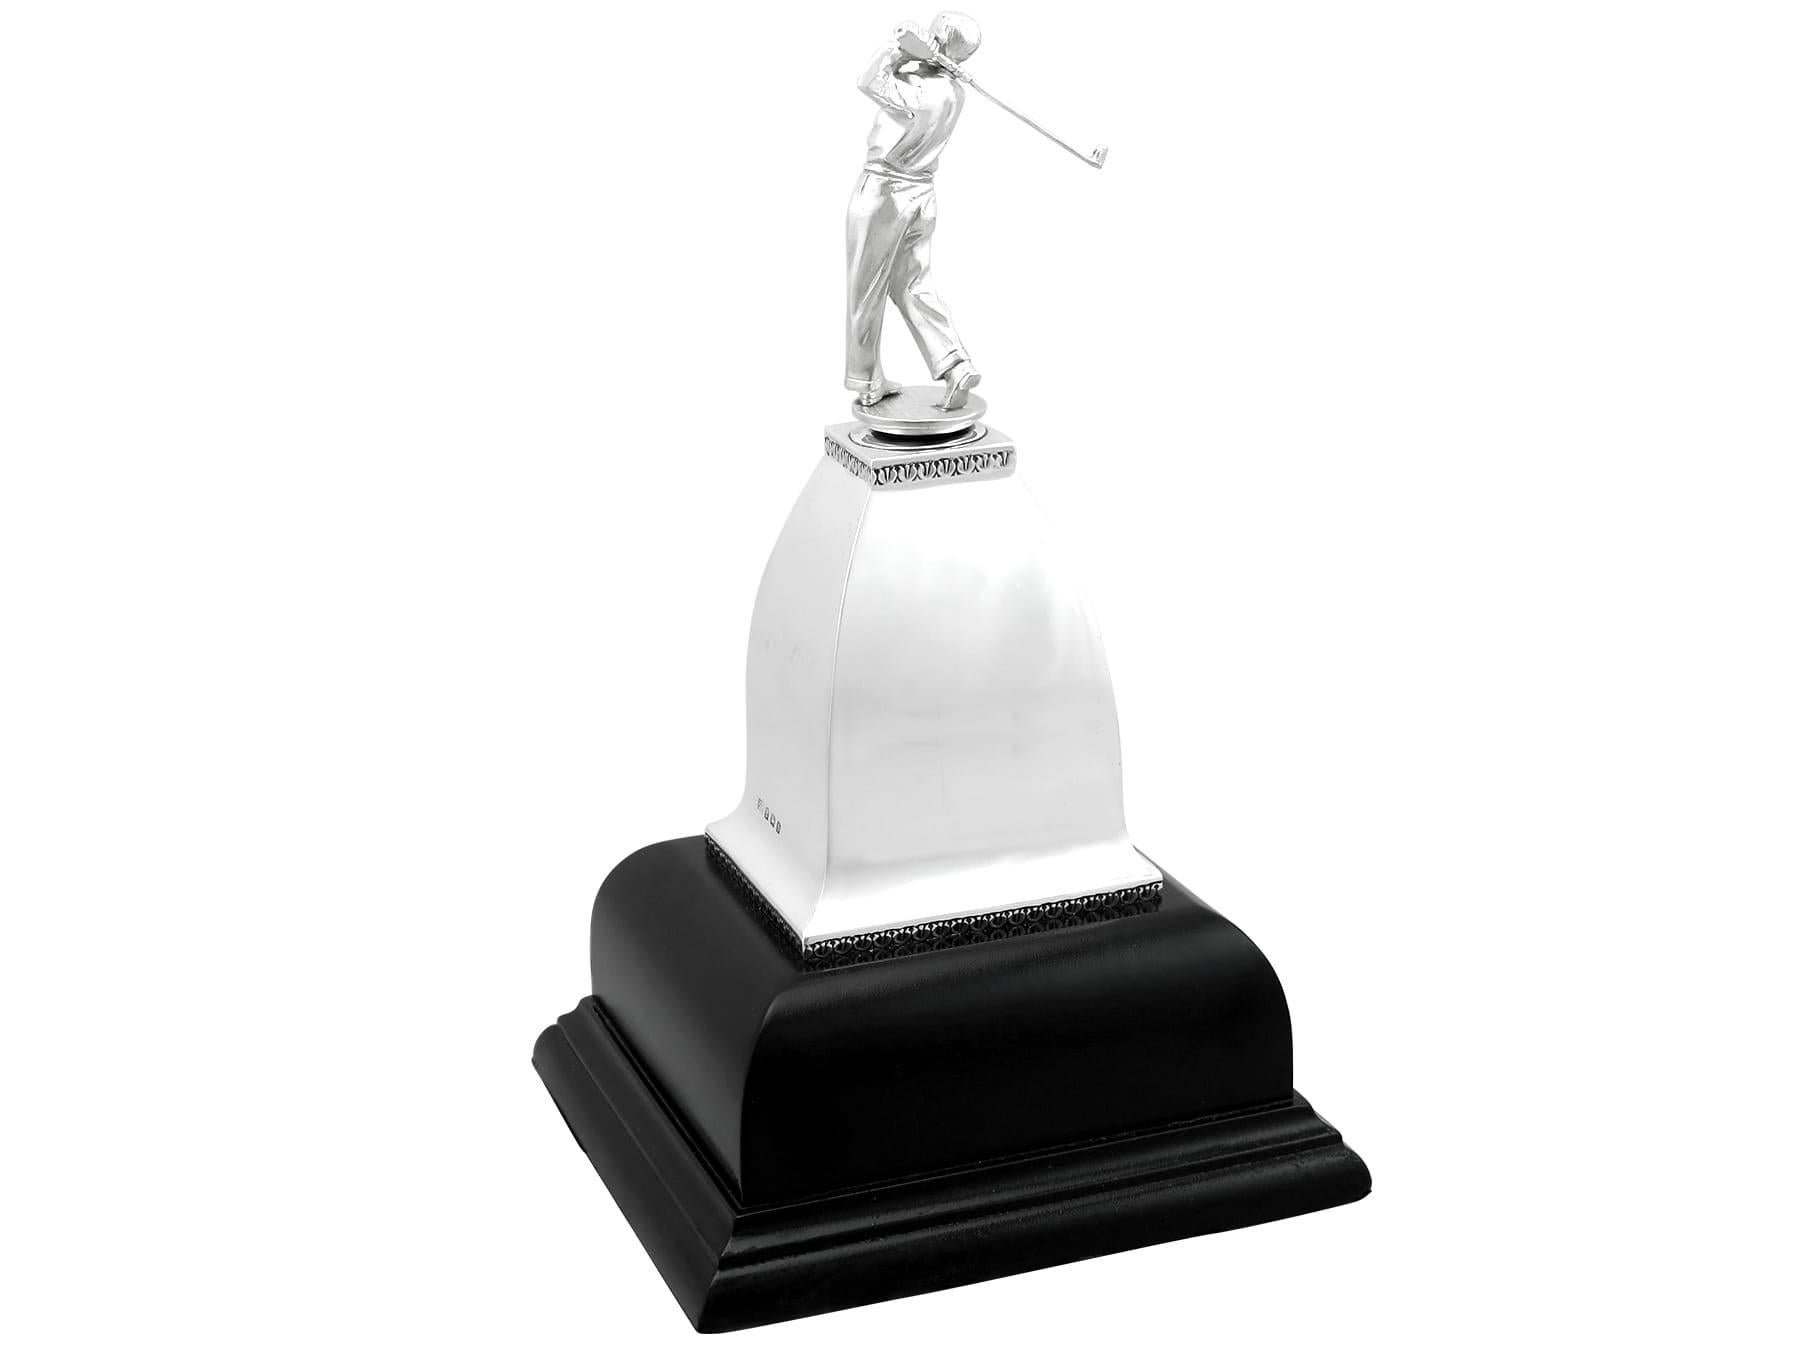 An exceptional, fine and impressive antique George V English cast sterling silver presentation trophy on plinth in the form of a golfer; an addition to our golfing silverware collection.

This exceptional antique George V English cast sterling